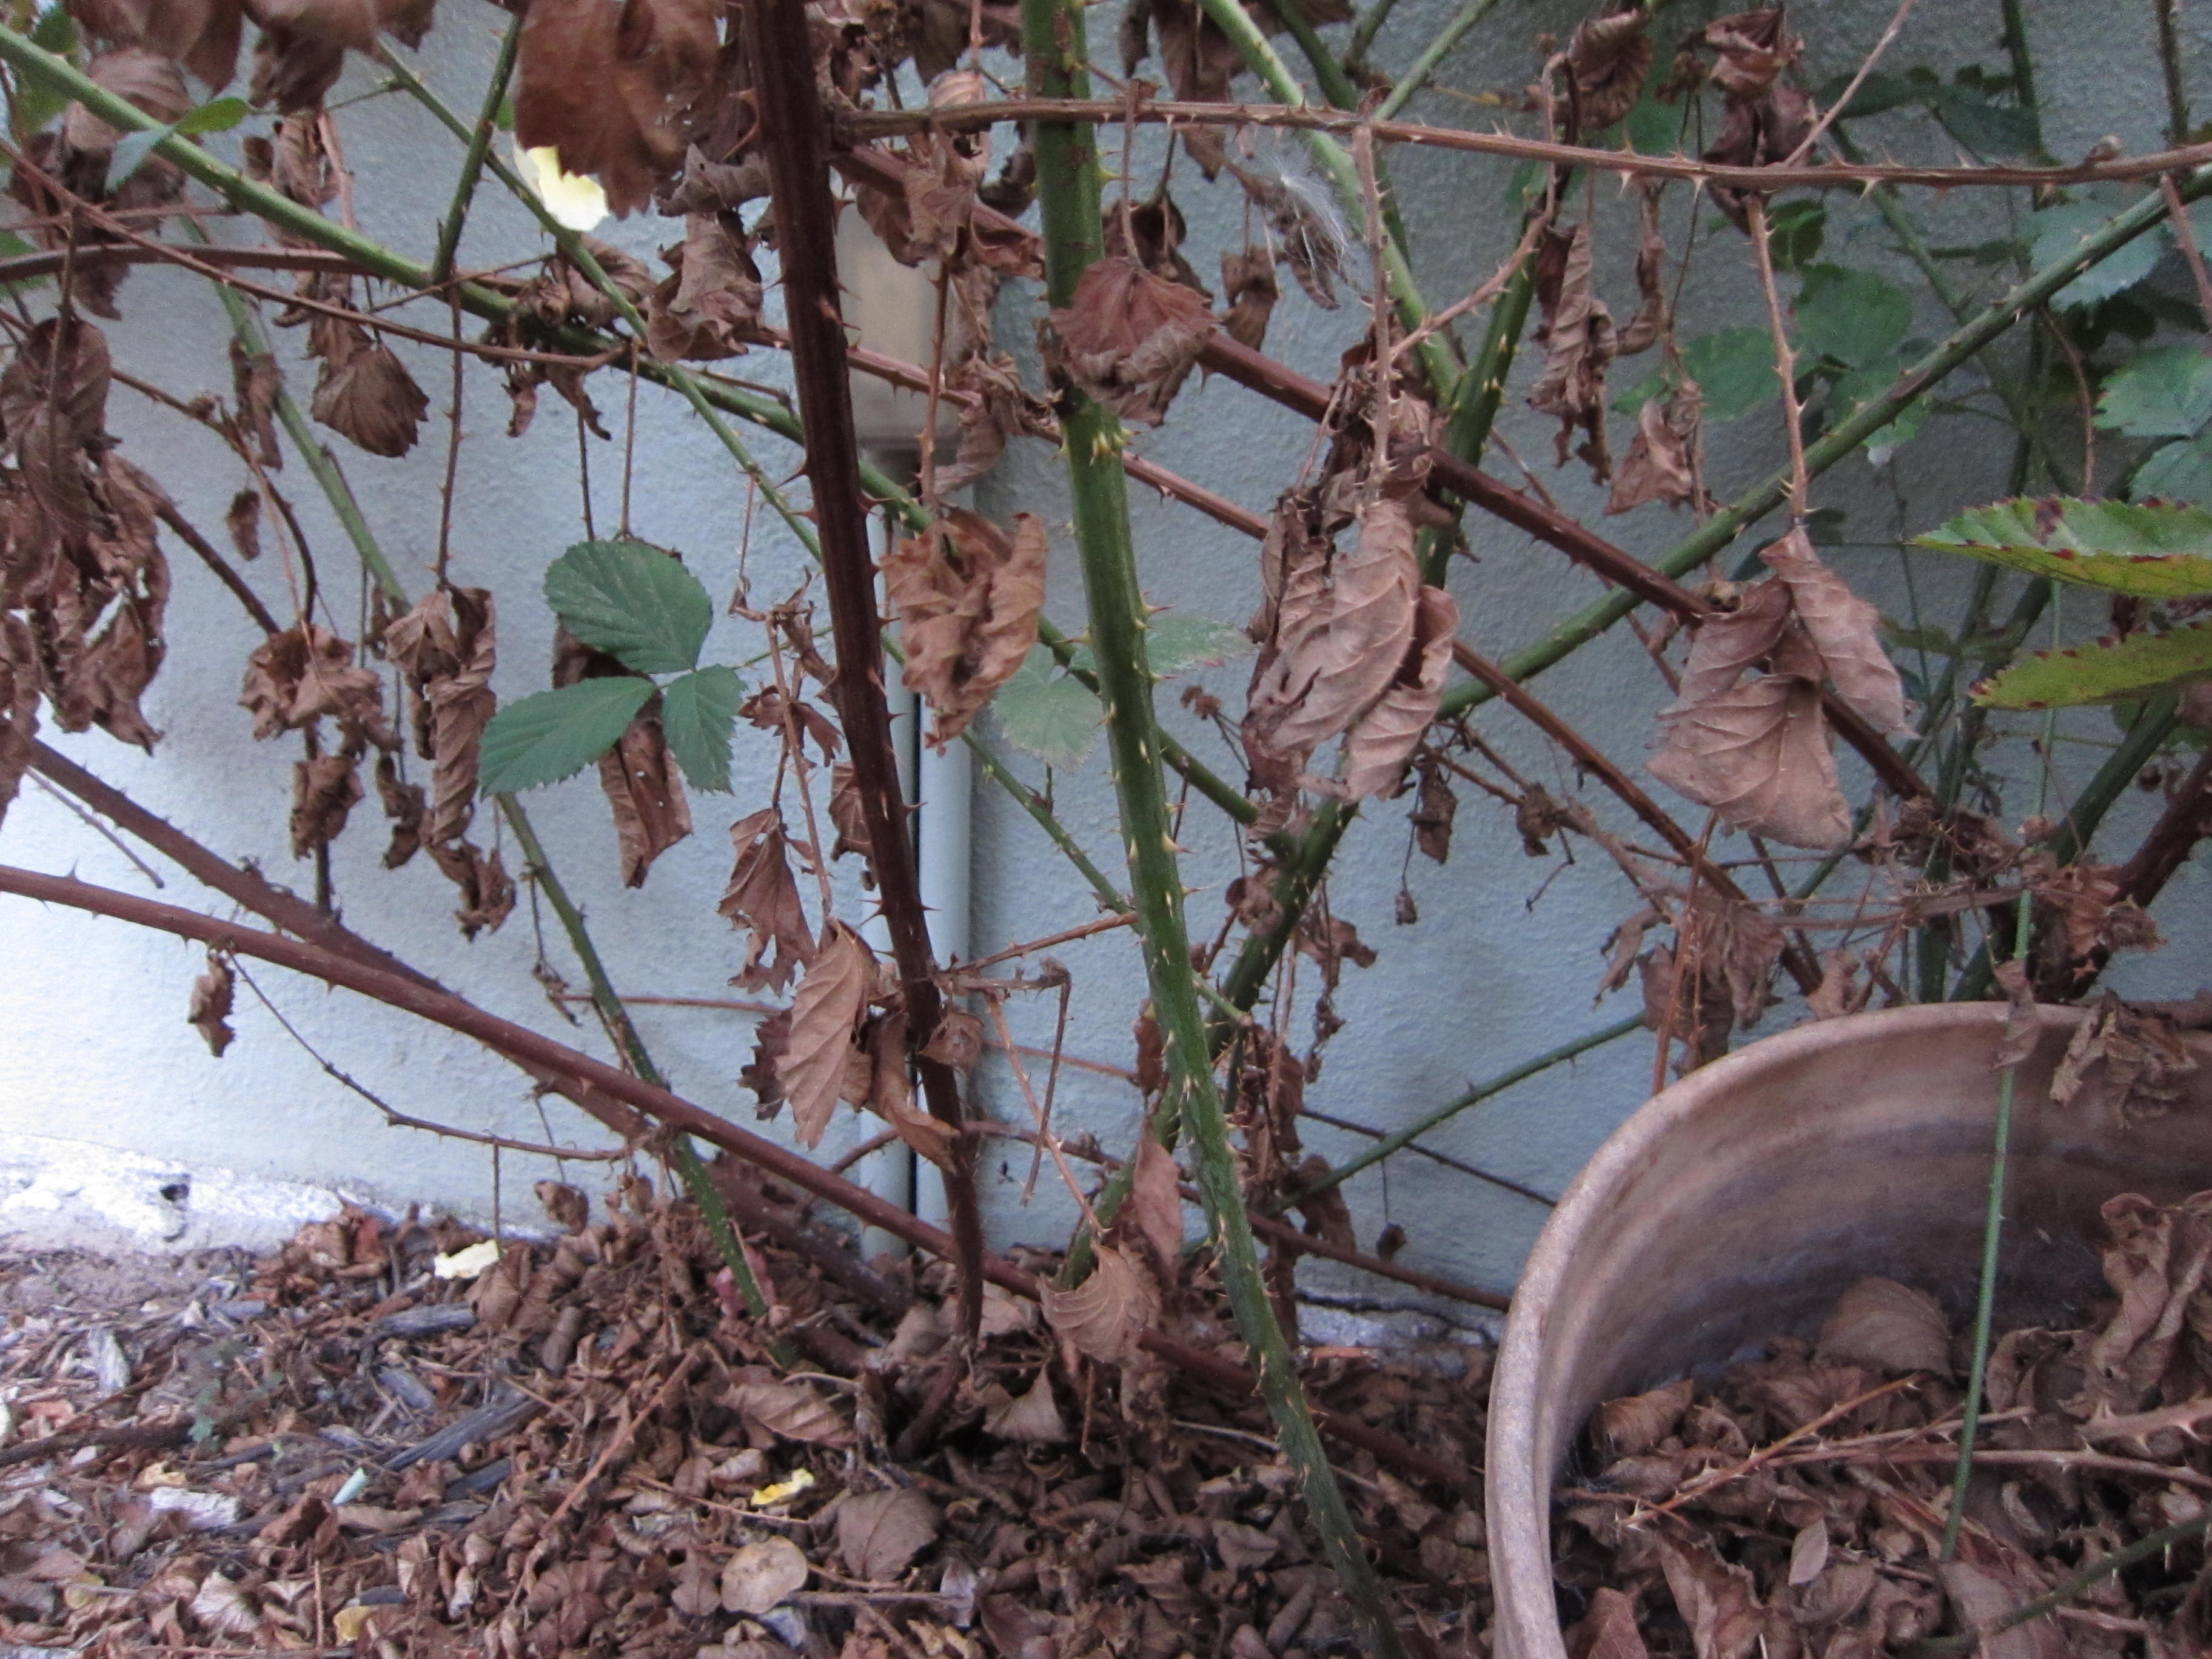 Prune blackberry canes that have turned brown. Leave green canes in place.